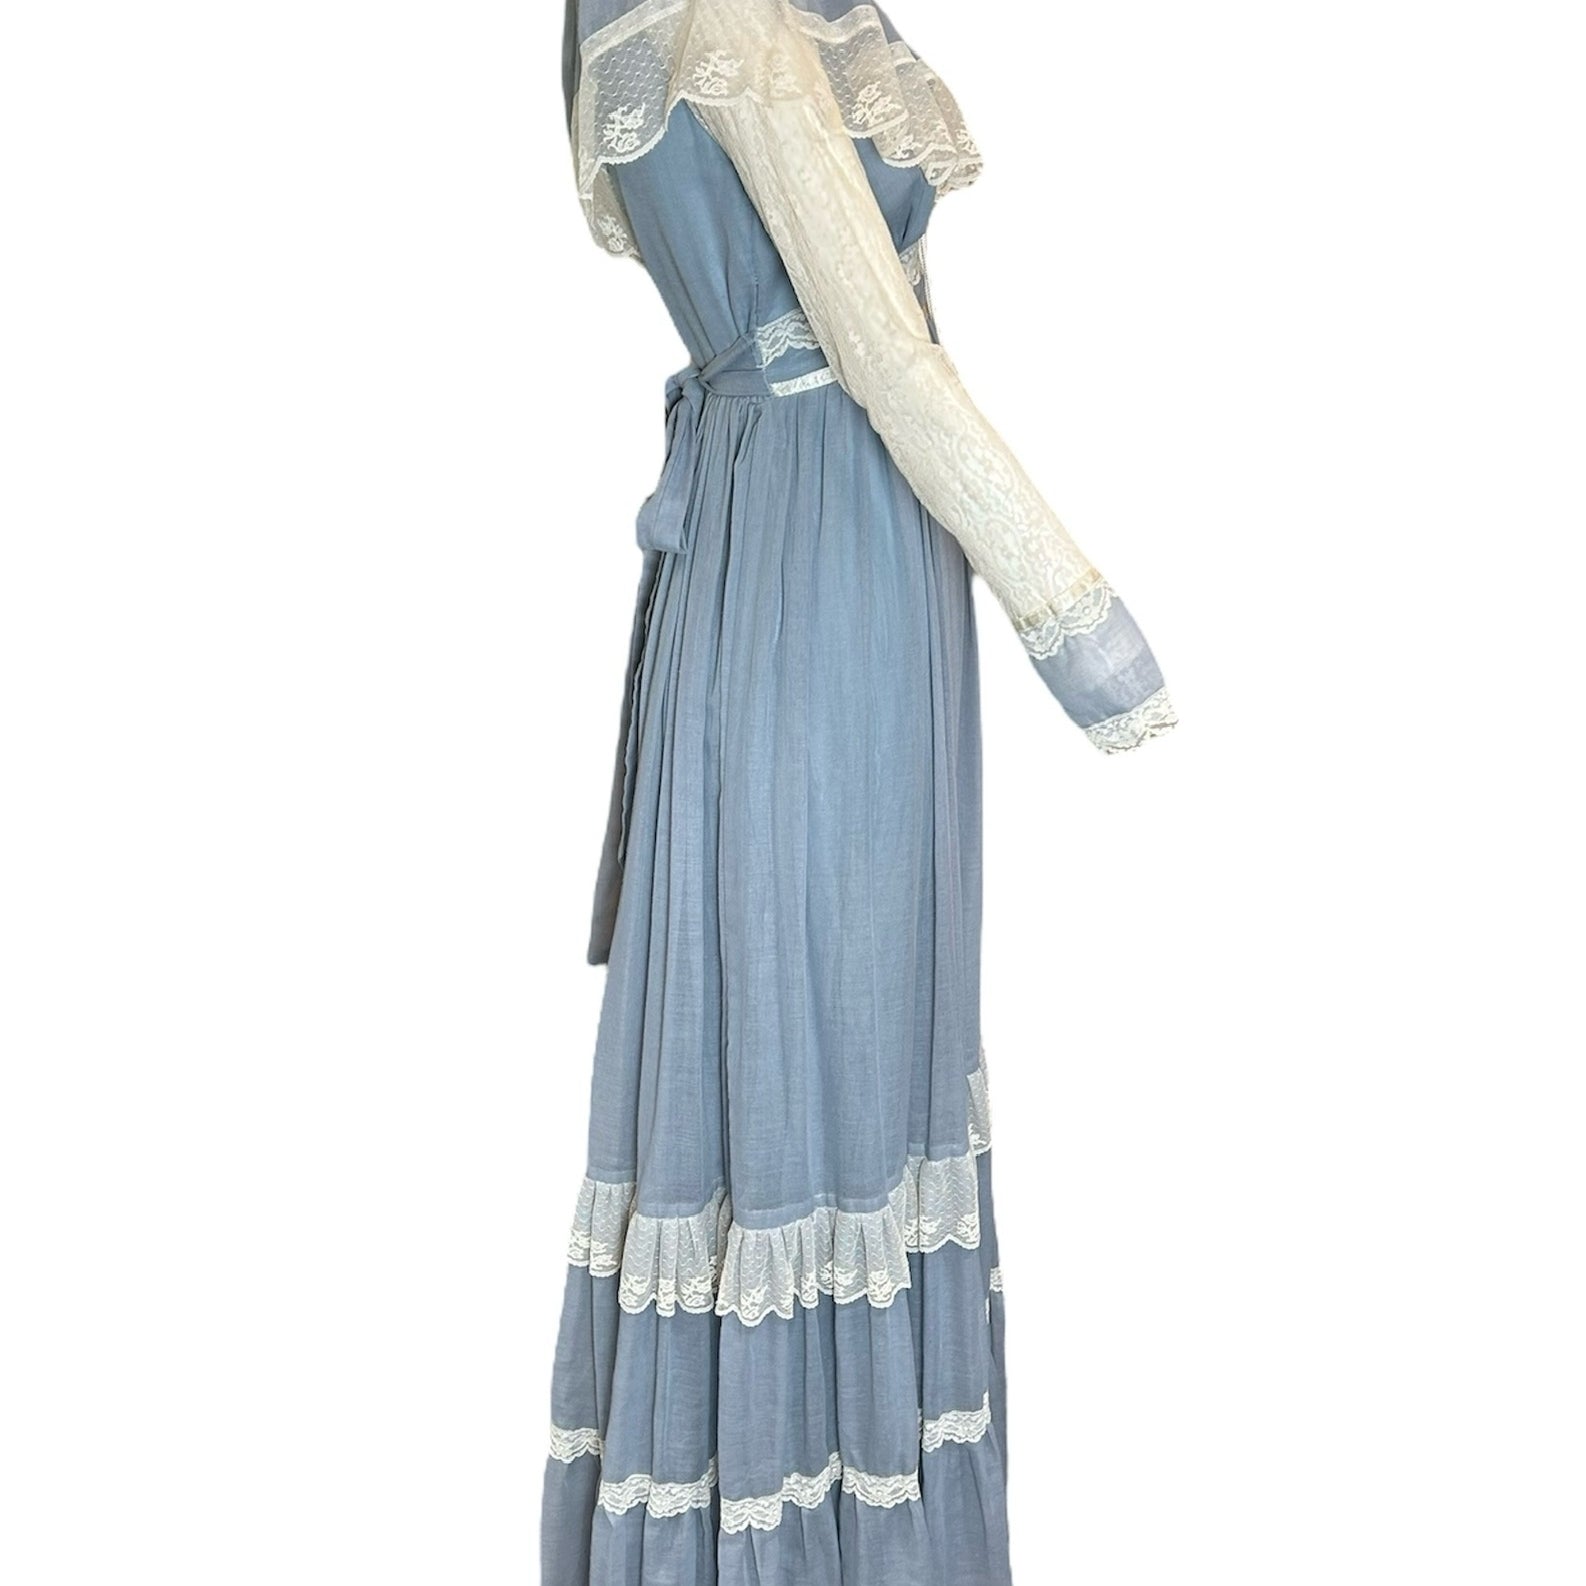 Gunne Sax 1970s Baby Blue Lace Maxi Dress SIDE PHOTO 2 OF 5